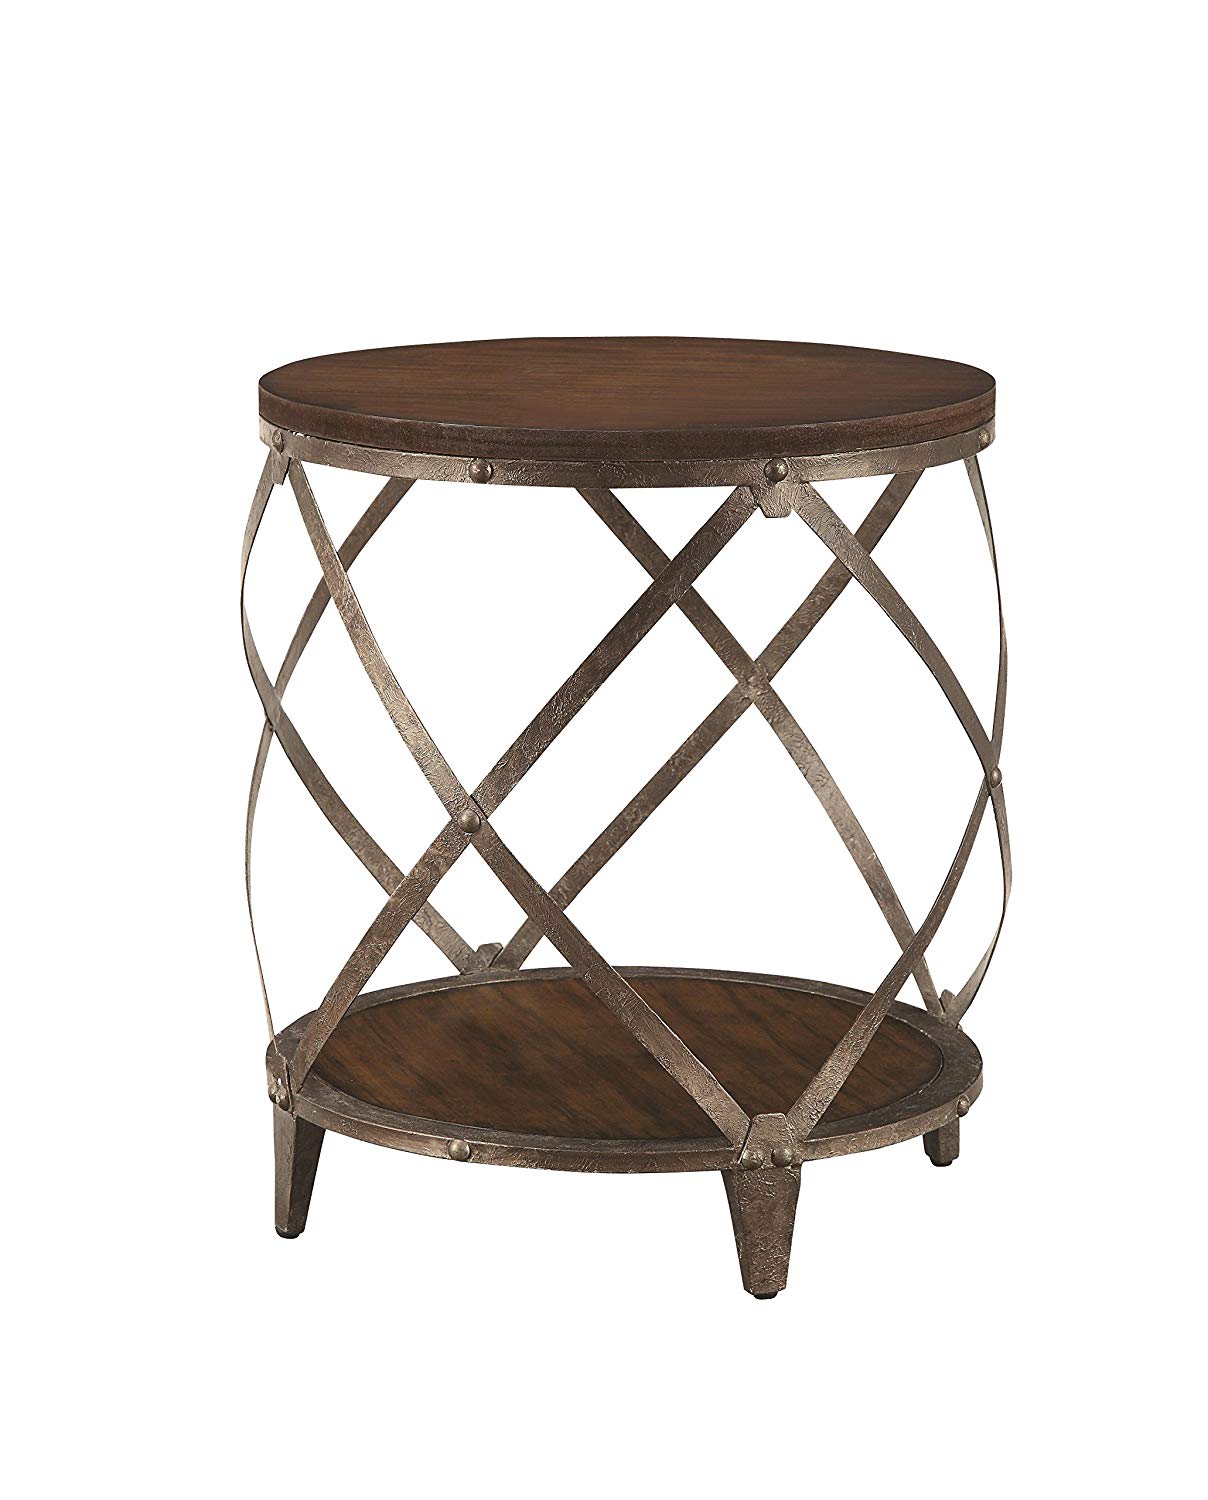 metal accent table with drum shape brown kitchen dining round bronze outdoor bistro umbrella hole throne for tall drummers white cube end patio lights bar height room sets modern